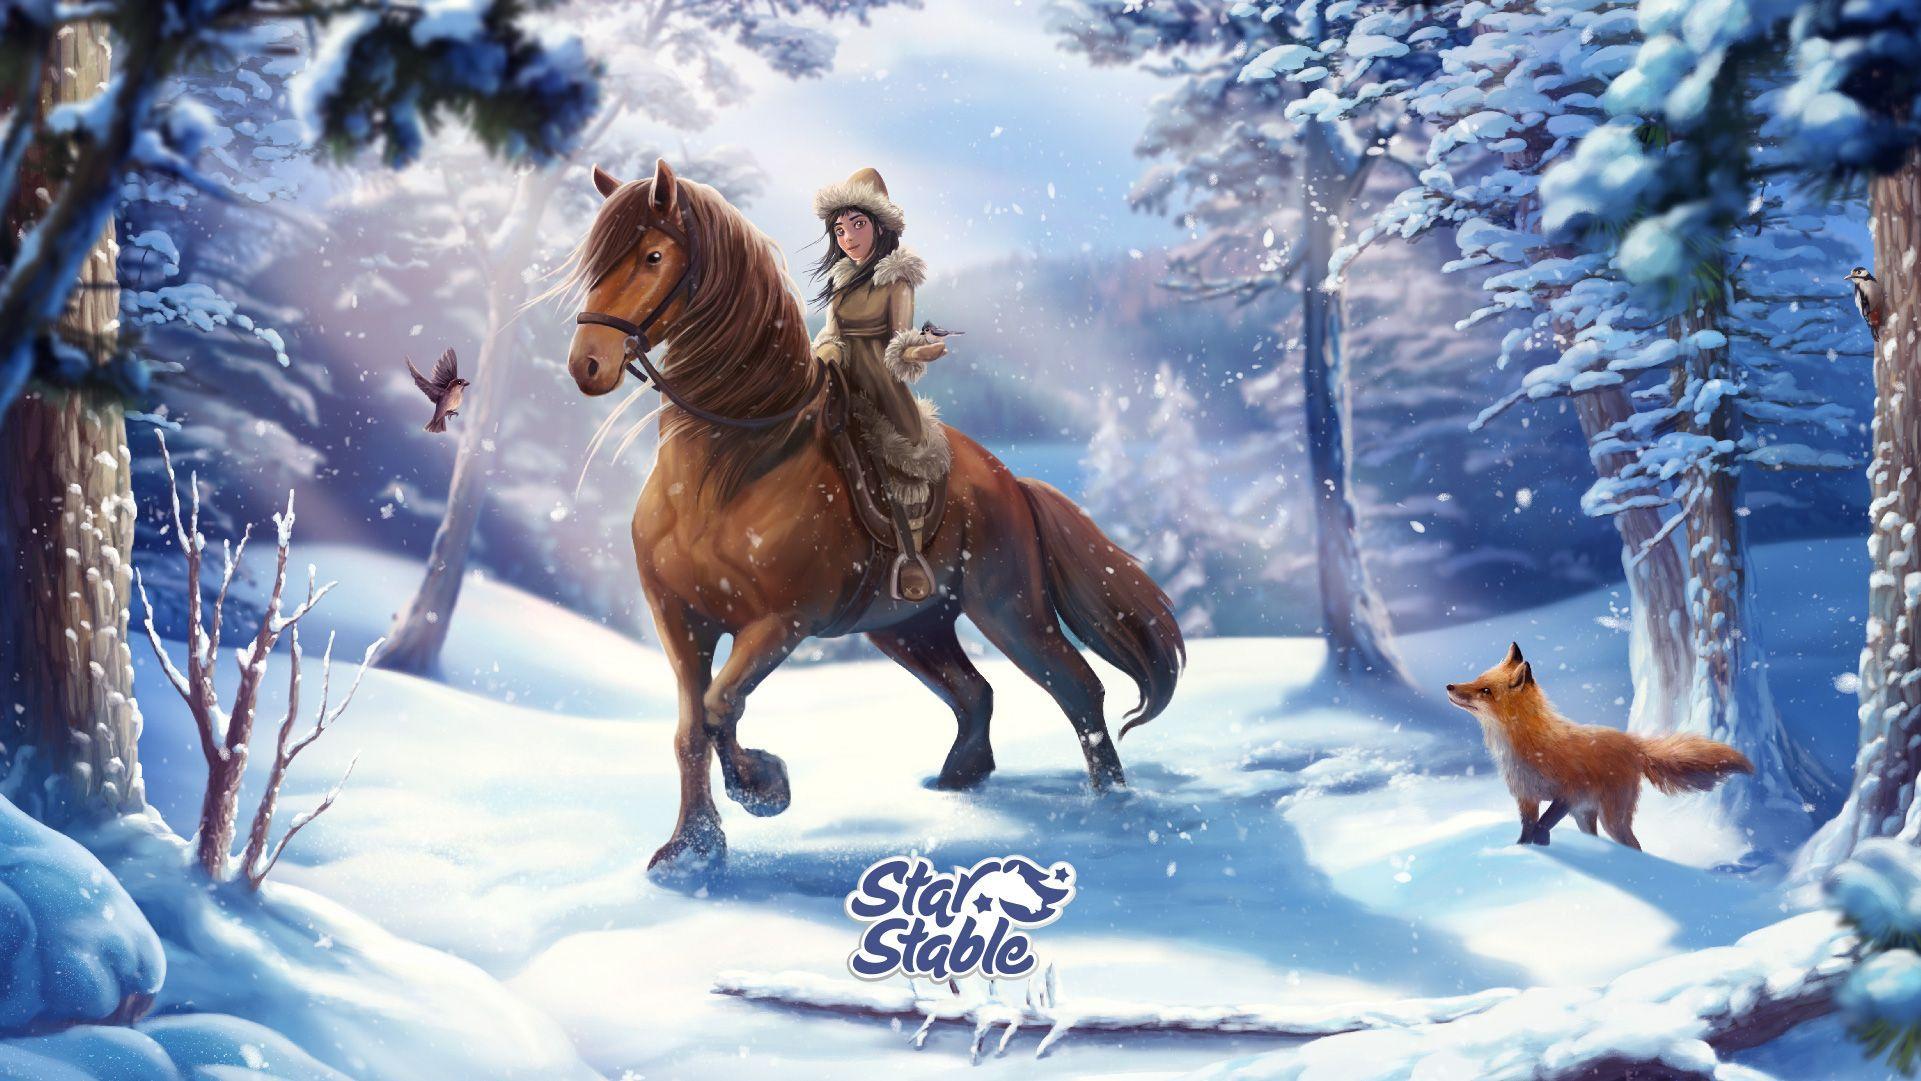 Star Stable Wallpapers Top Free Star Stable Backgrounds WallpaperAccess